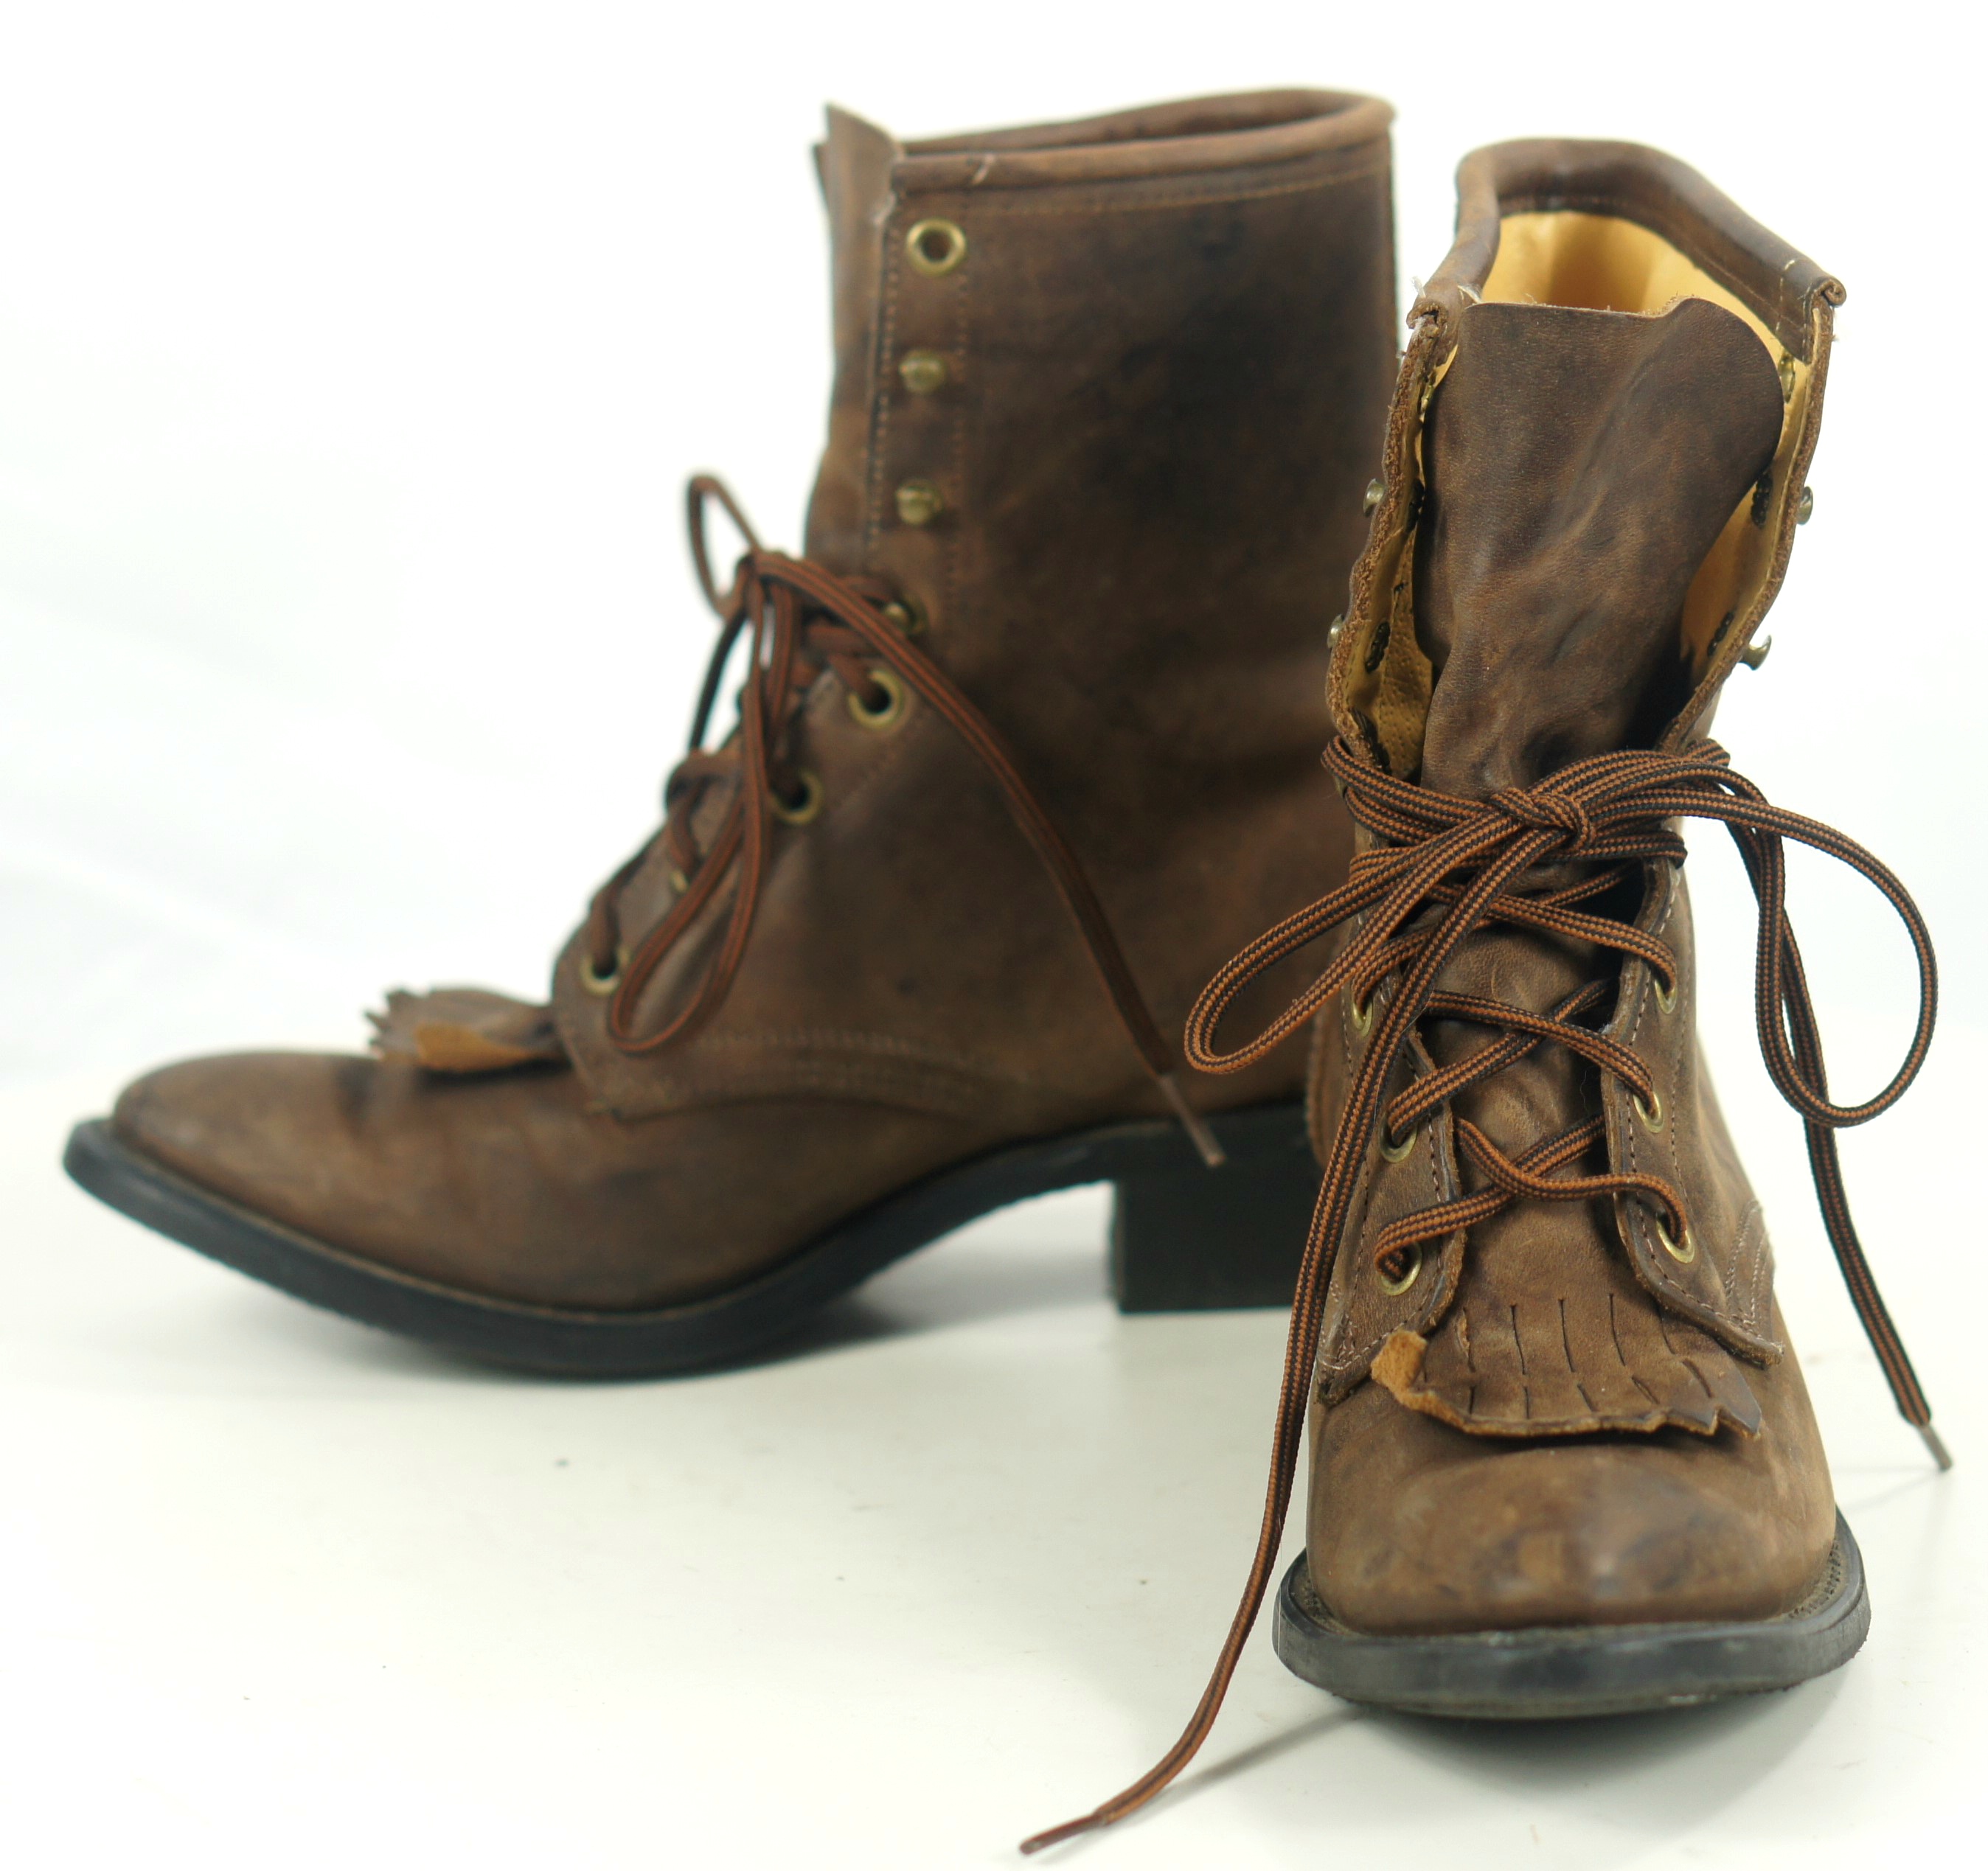 Laredo Brown Leather Lacer RIding Paddock Ankle Boots Vintage US Made ...